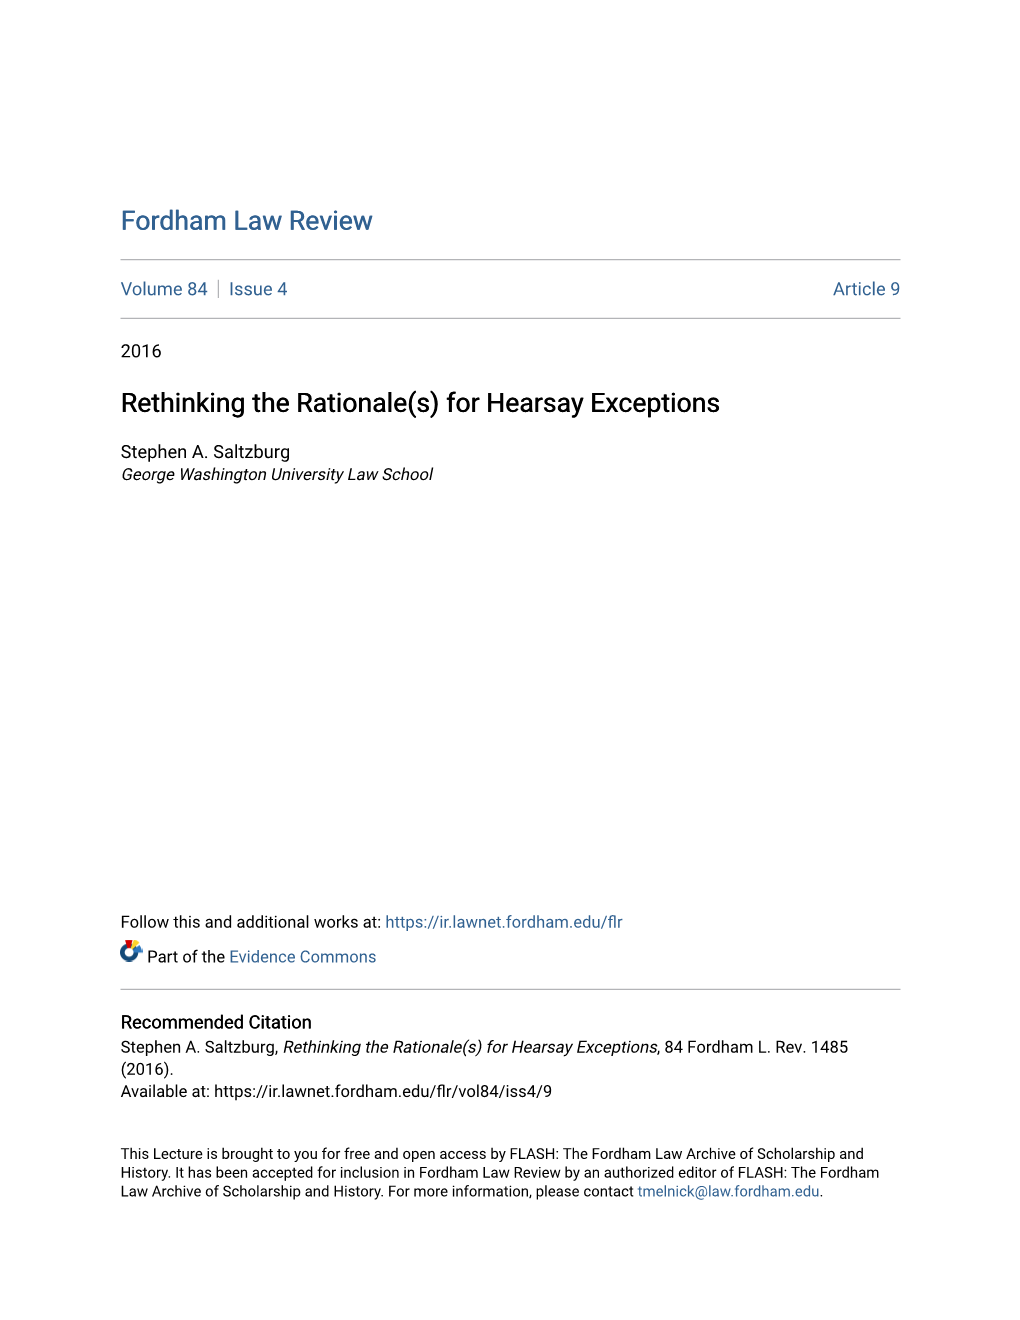 Rethinking the Rationale(S) for Hearsay Exceptions